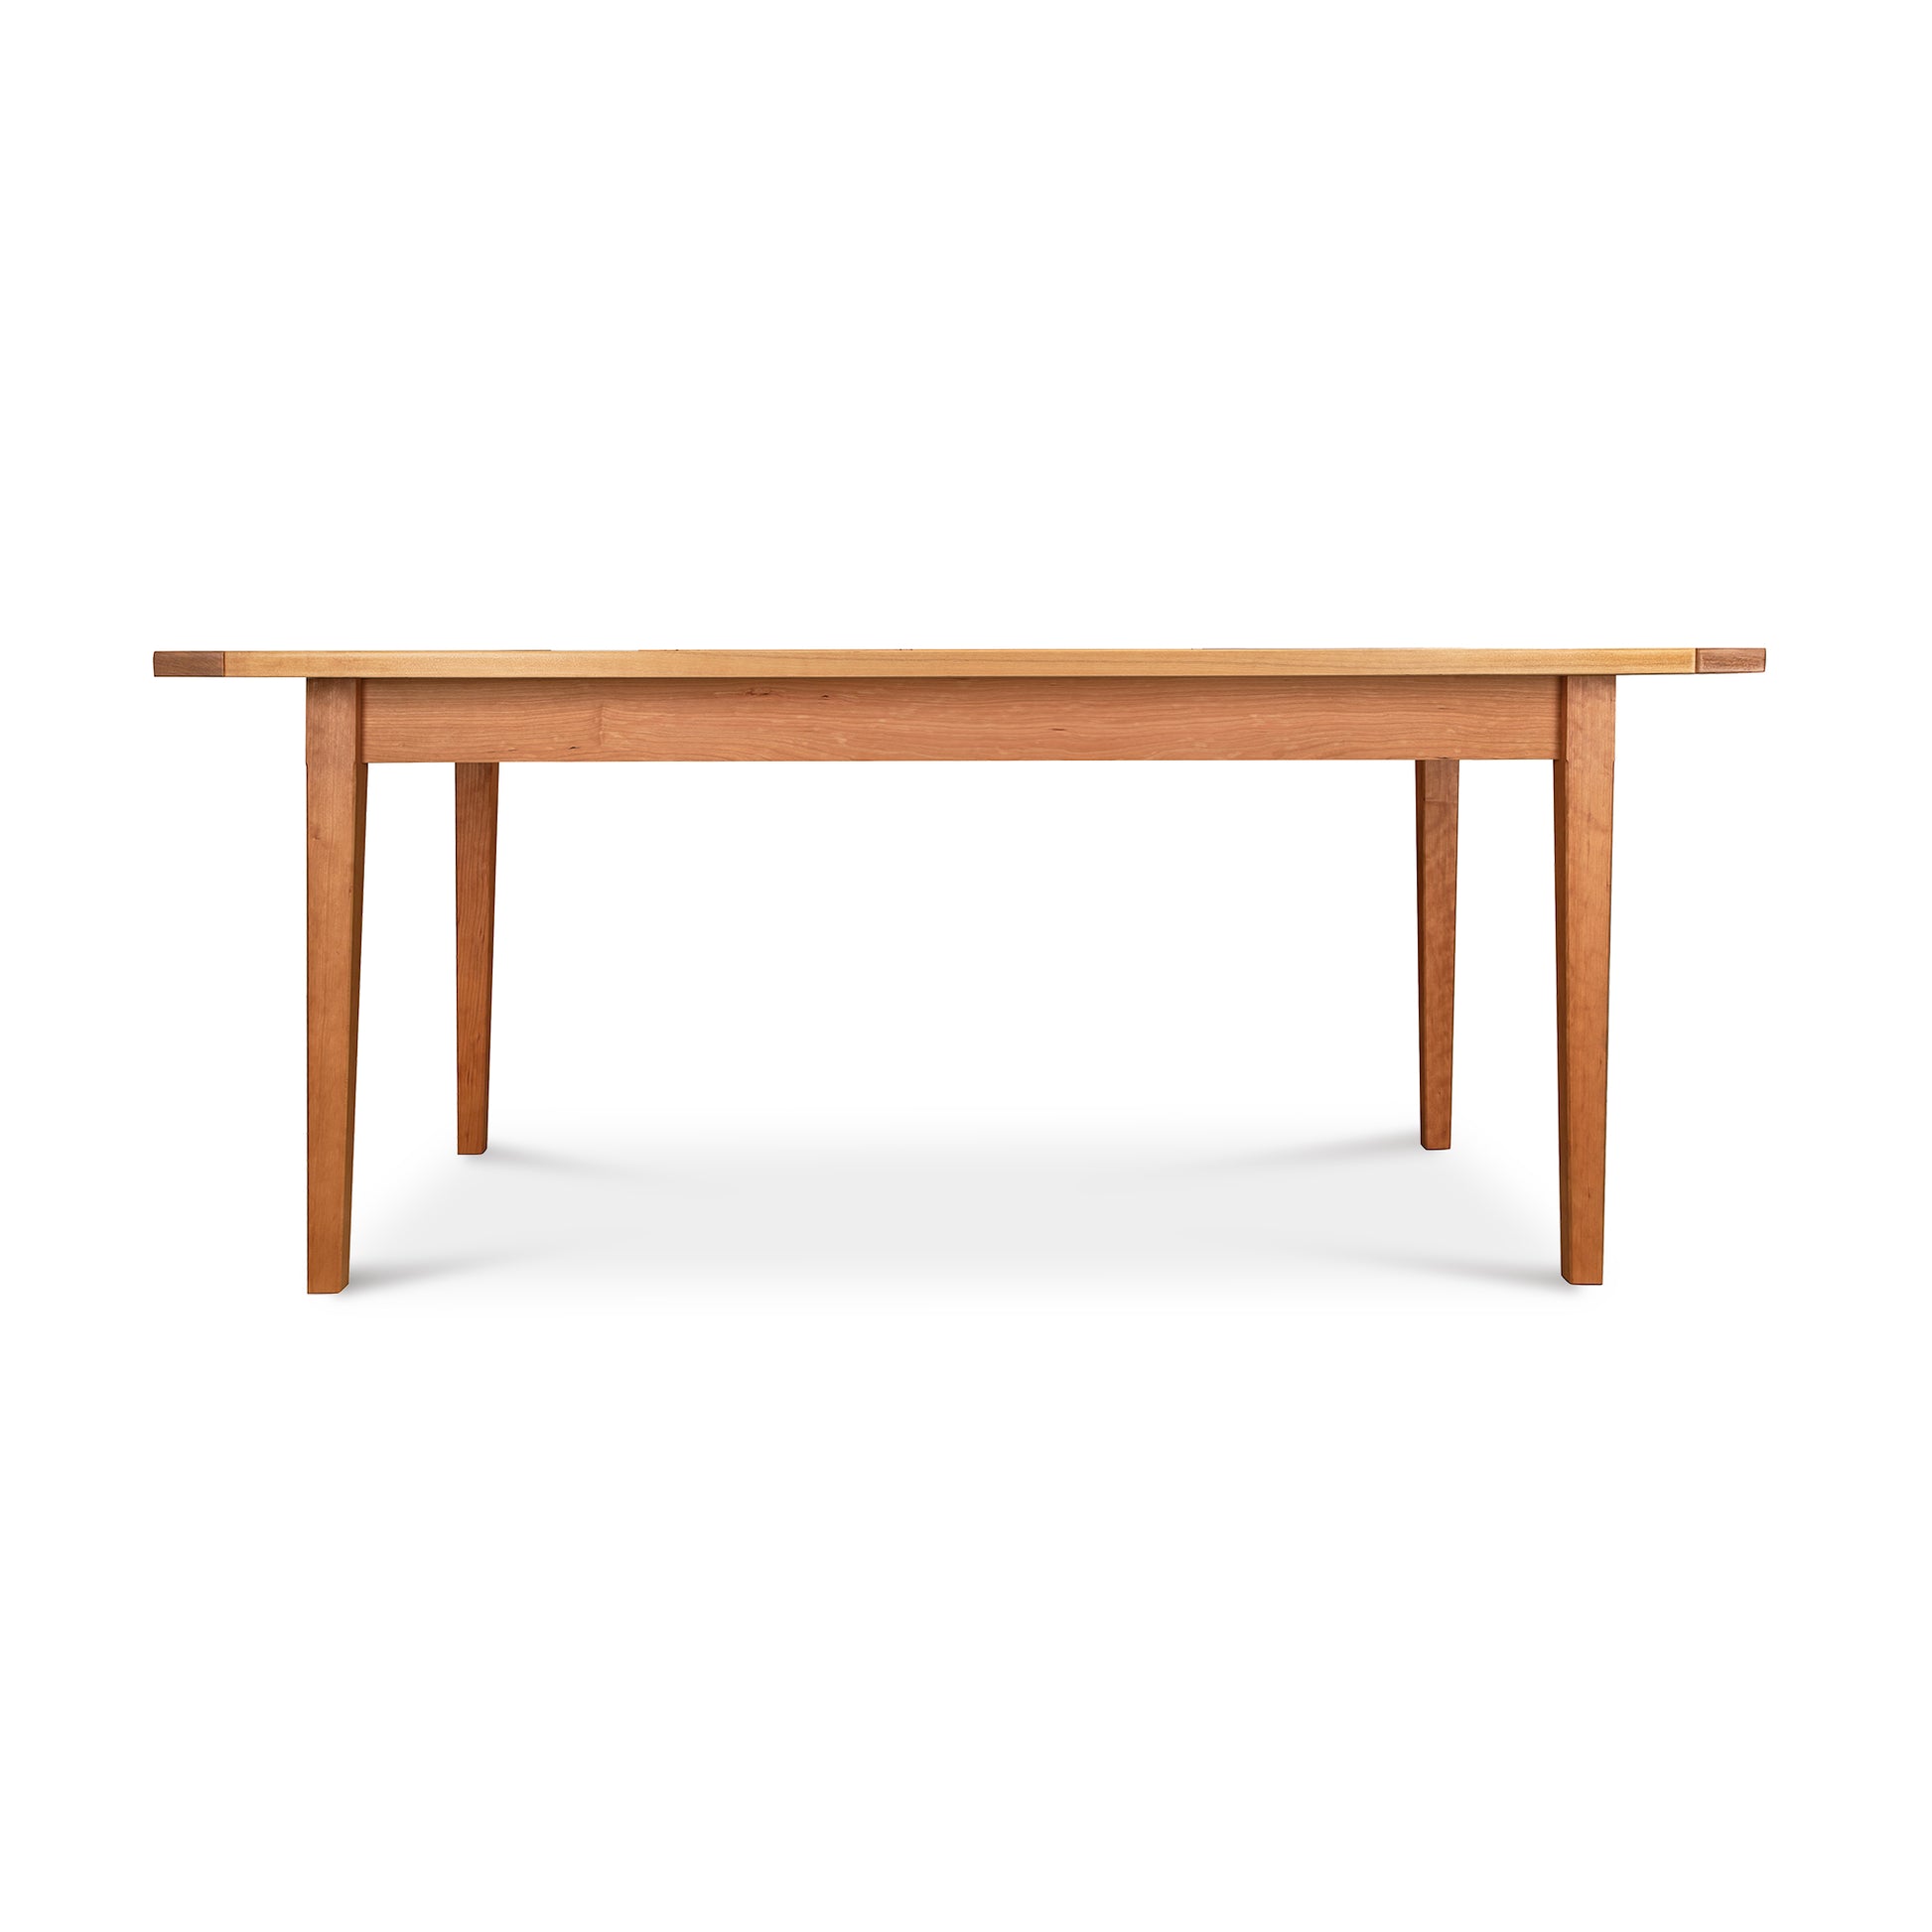 A simple Vermont Shaker Solid Top Harvest Table with a smooth top and four sturdy legs, isolated on a white background by Maple Corner Woodworks.